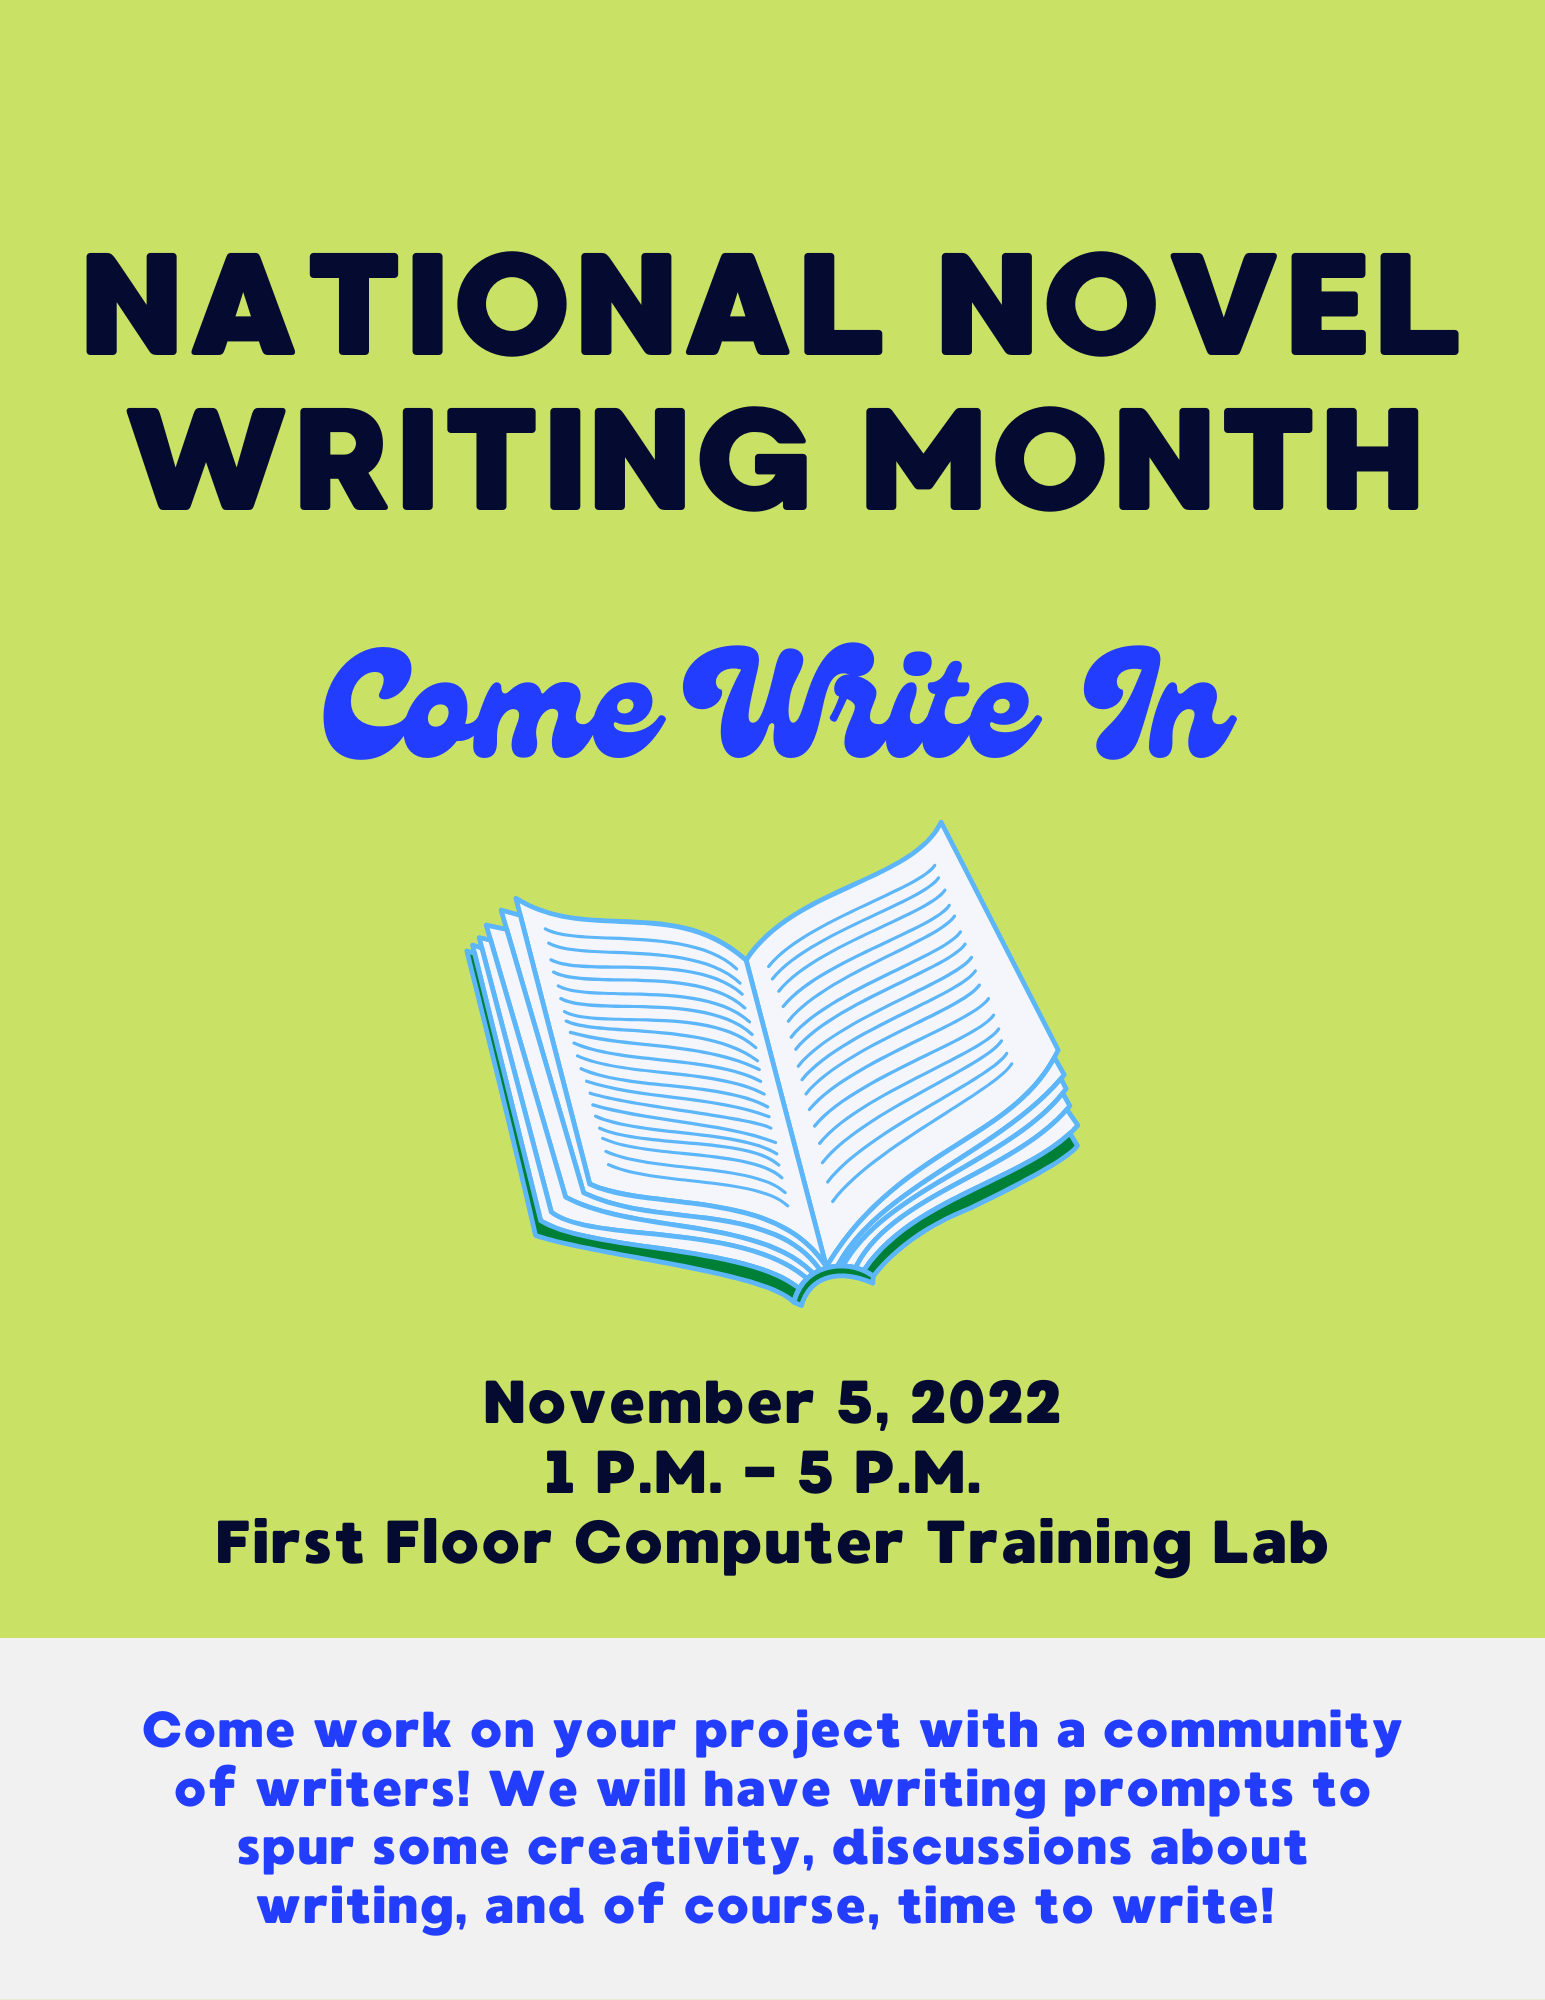 National Novel Writing Month Come Write In: November 5, 2022 from 1:00 p.m. - 5:00 p.m. 